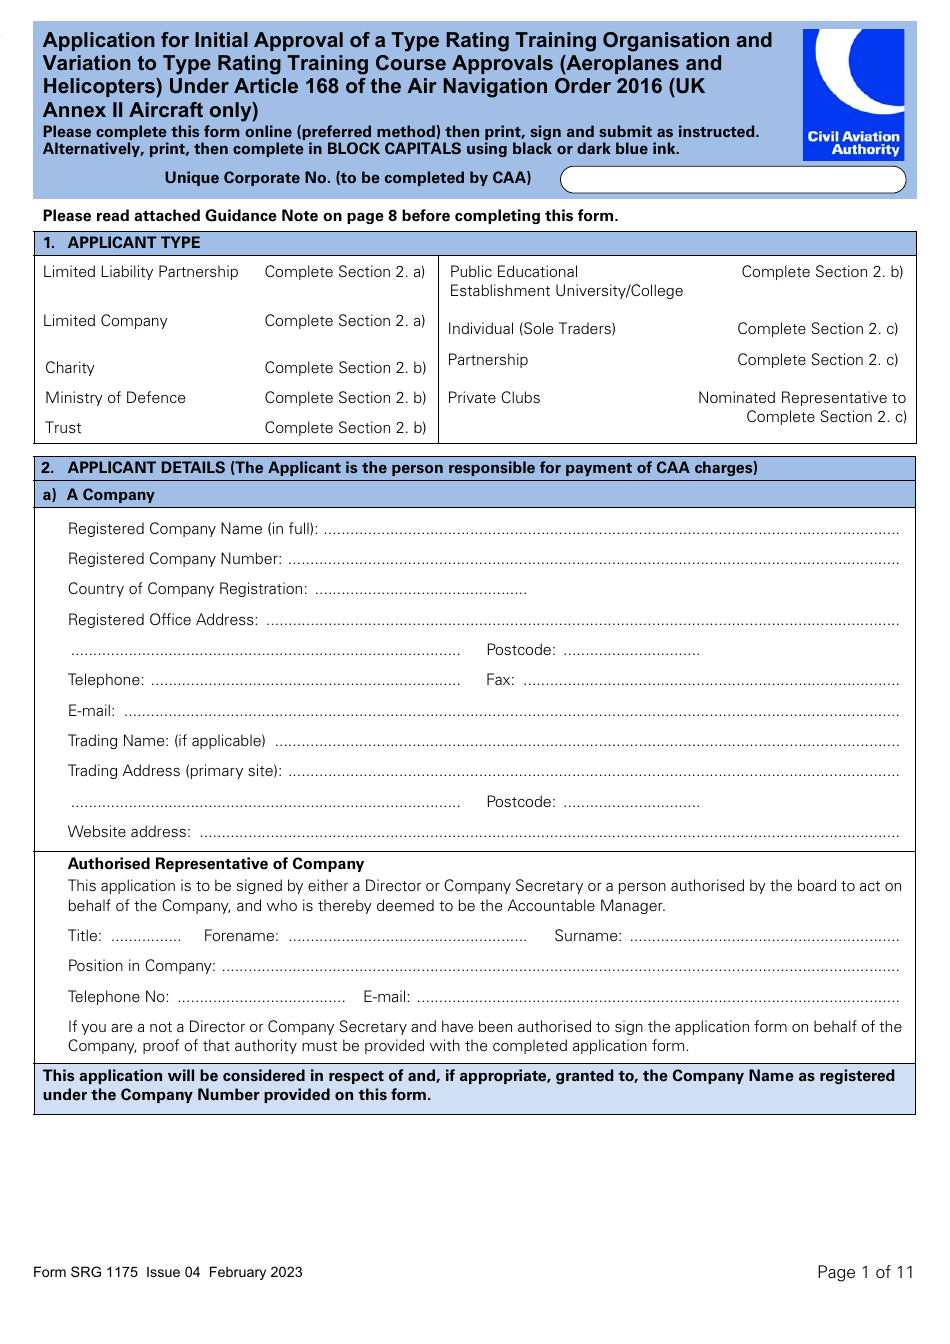 Form SRG1175 Application for Initial Approval of a Type Rating Training Organisation and Variation to Type Rating Training Course Approvals (Aeroplanes and Helicopters) Under Article 168 of the Air Navigation Order 2016 (UK Annex II Aircraft Only) - United Kingdom, Page 1